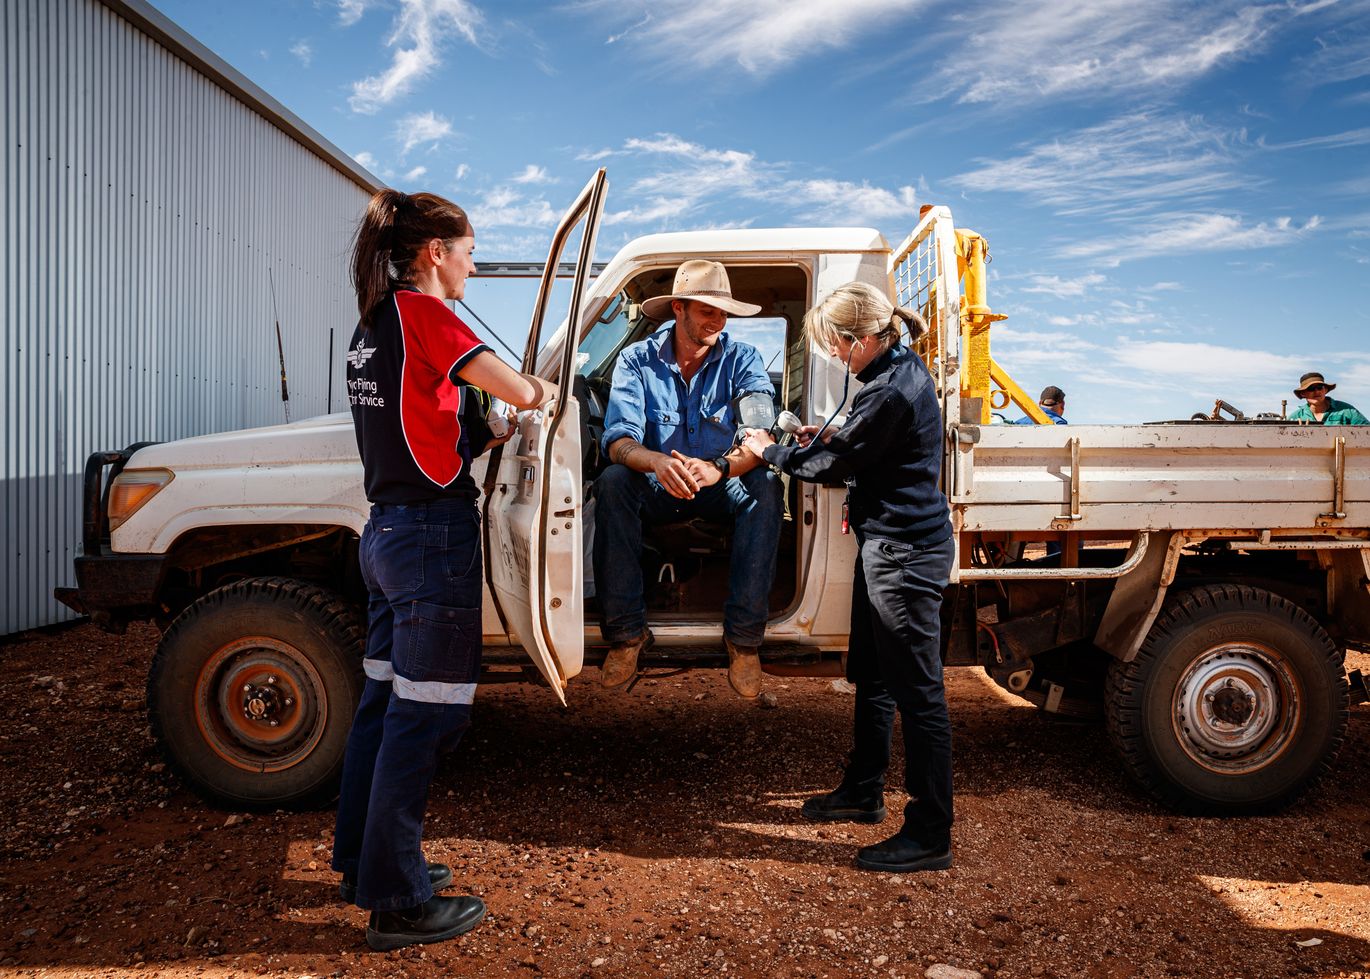 RFDS outback community health services